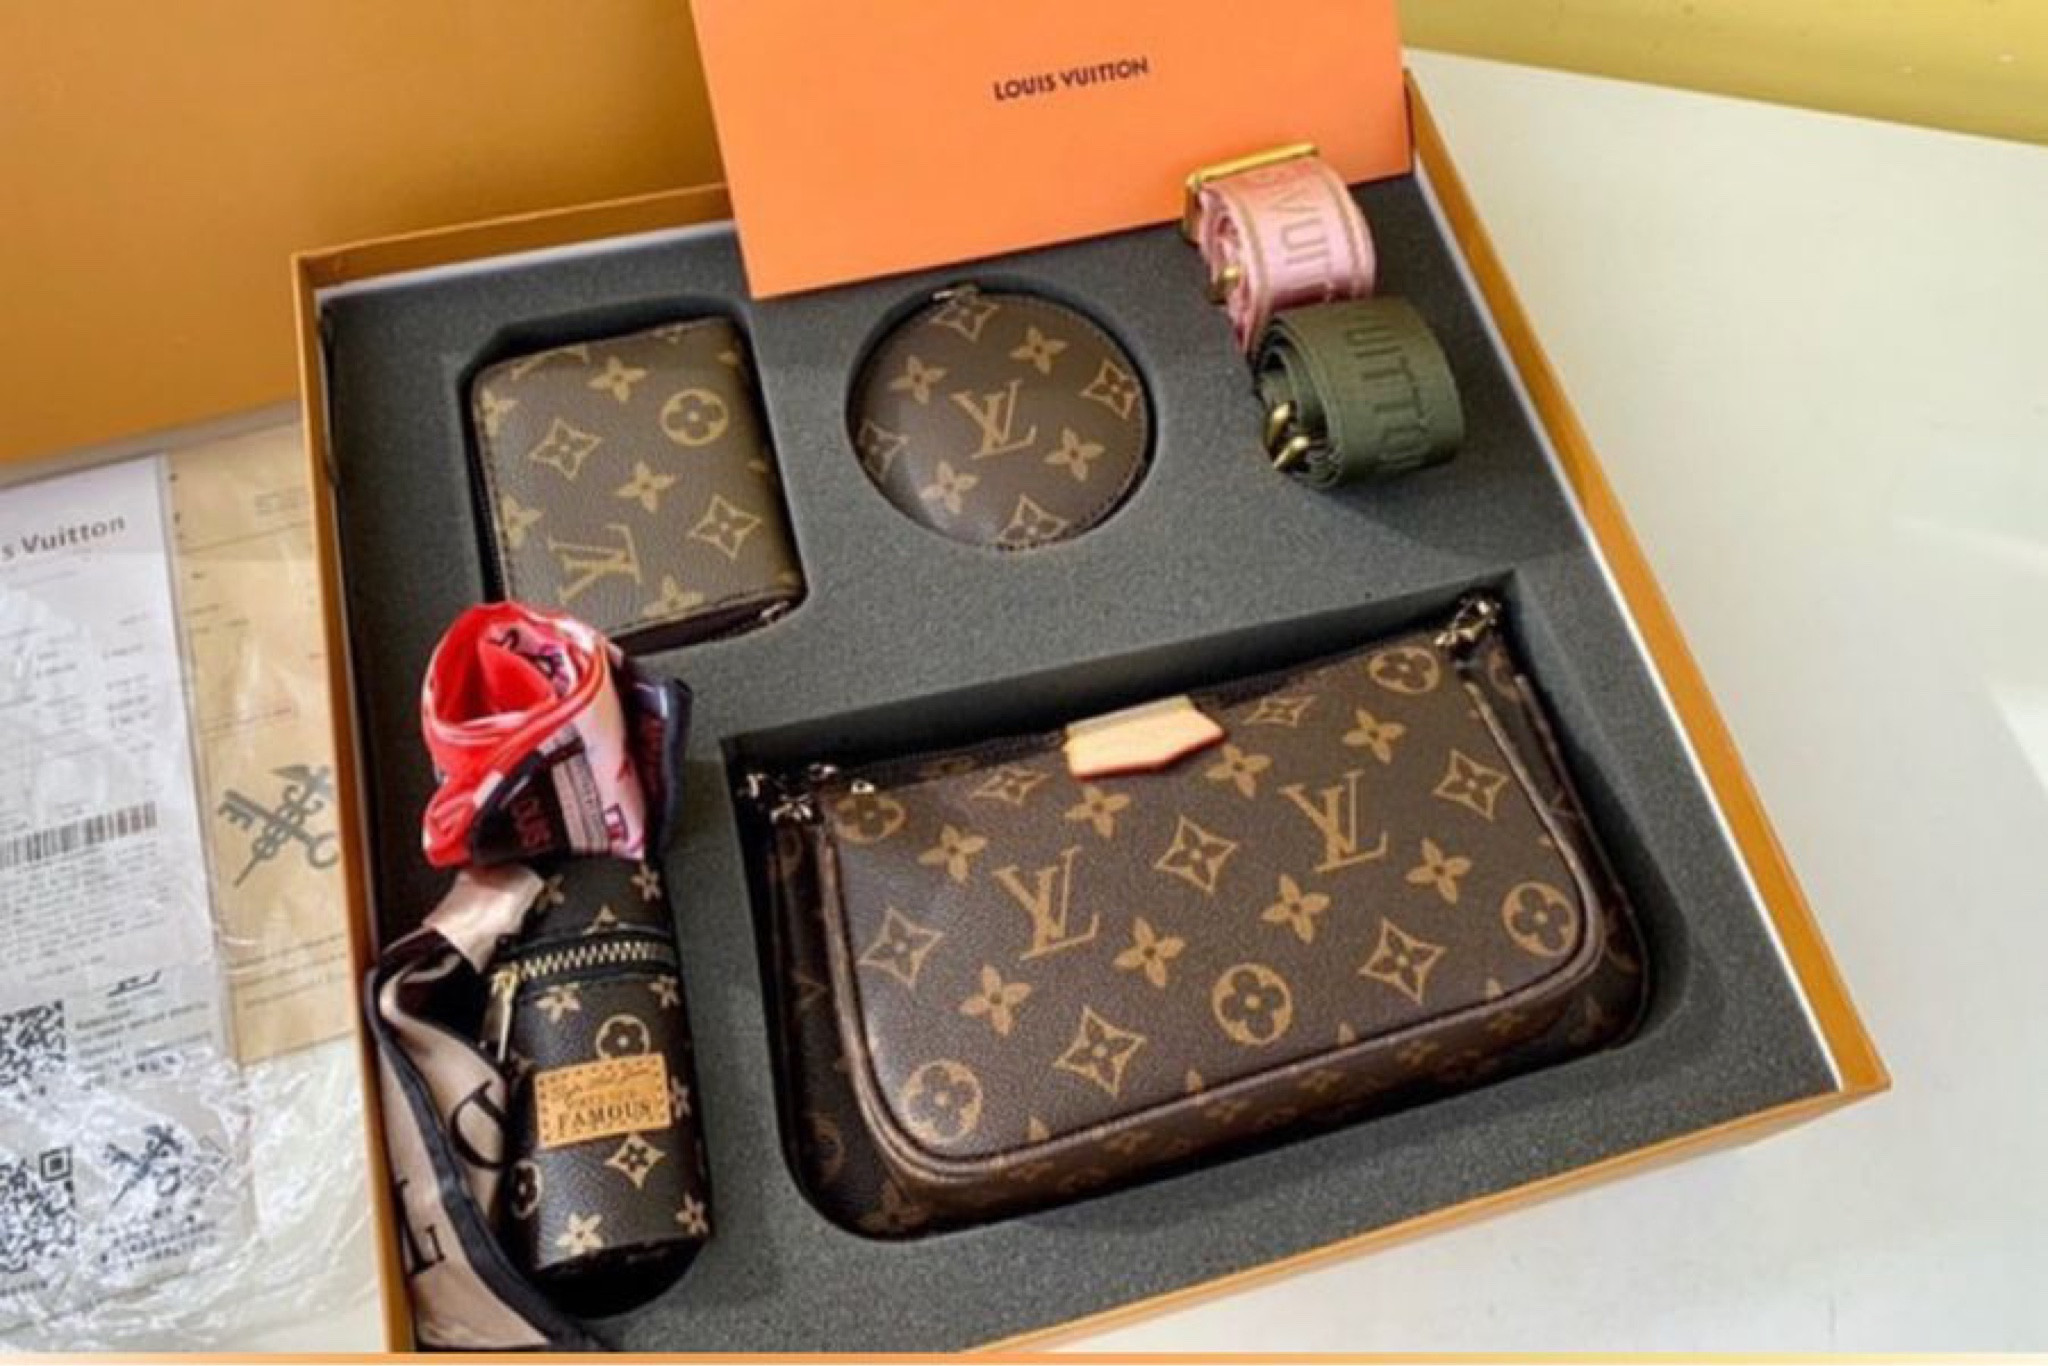 Dhgate Unboxing: Voice over Review, LV Vanity PM, Luxury for Less